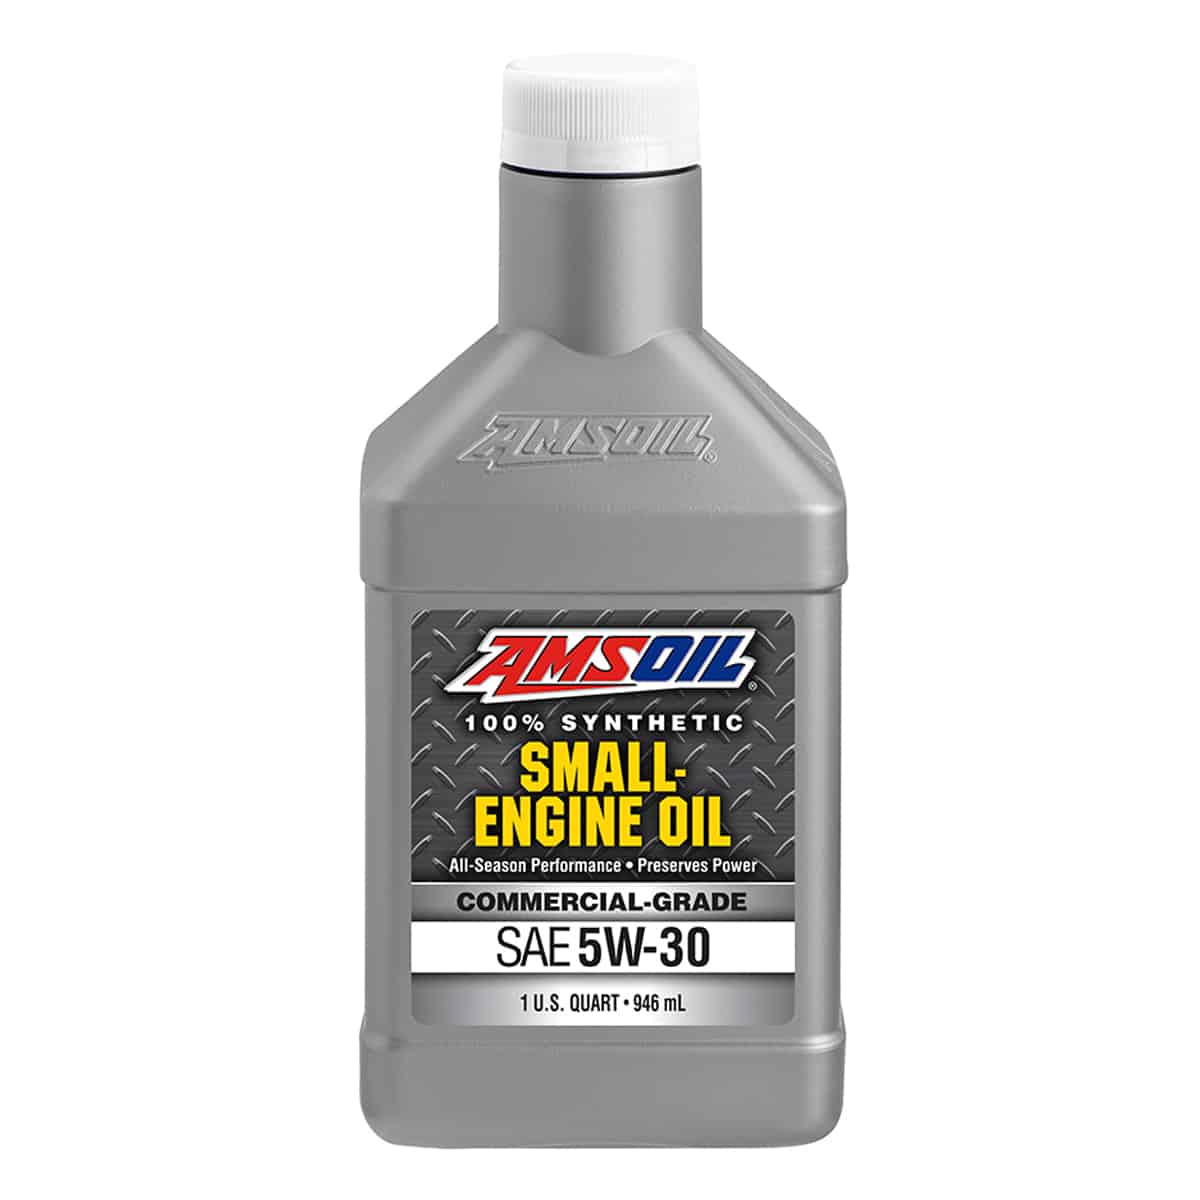 100% Synthetic Small-Engine Oil